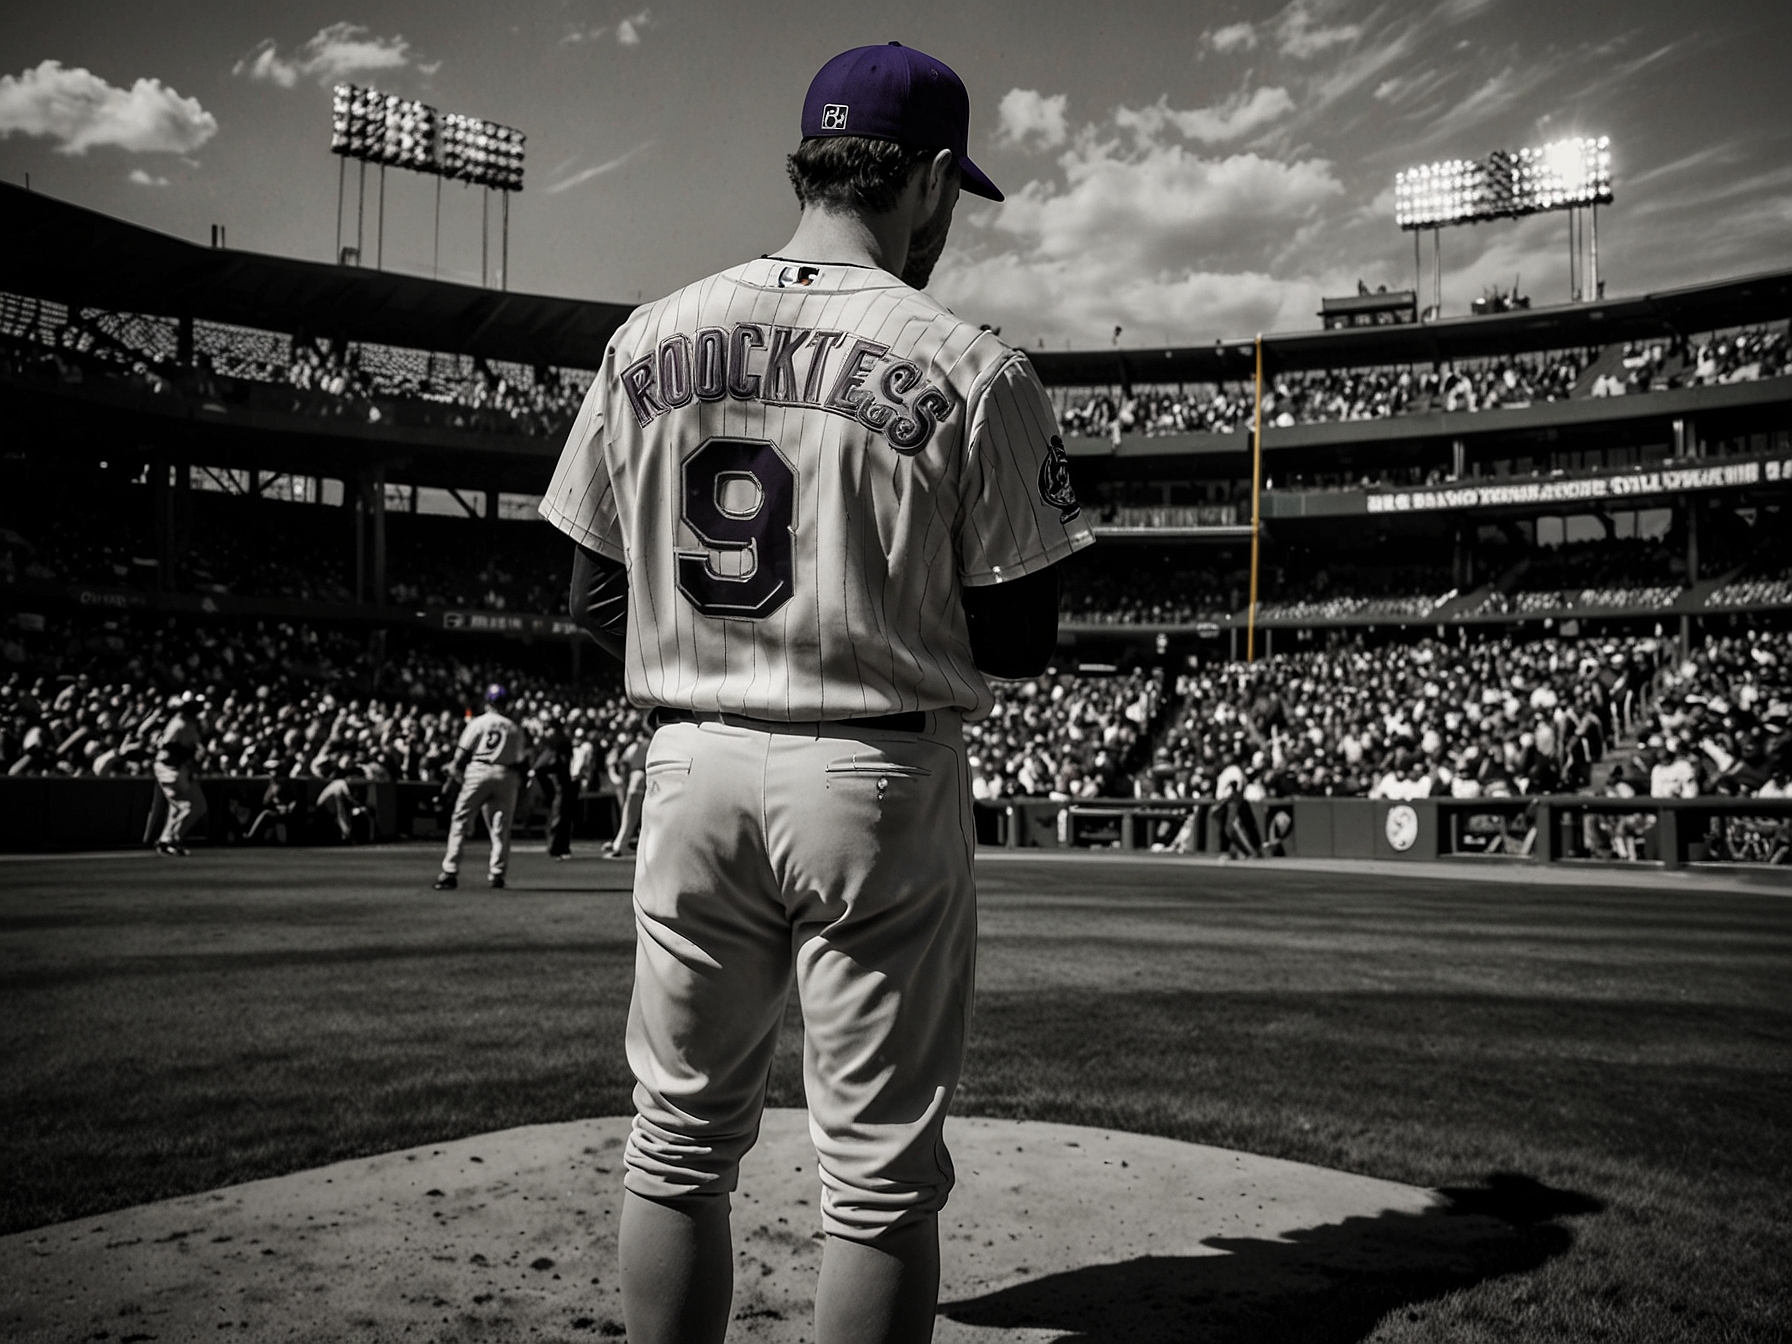 The Colorado Rockies' Opening Day starter stands on the mound at Coors Field, looking determined as he prepares to make his long-anticipated return, under the watchful eyes of fans and teammates.